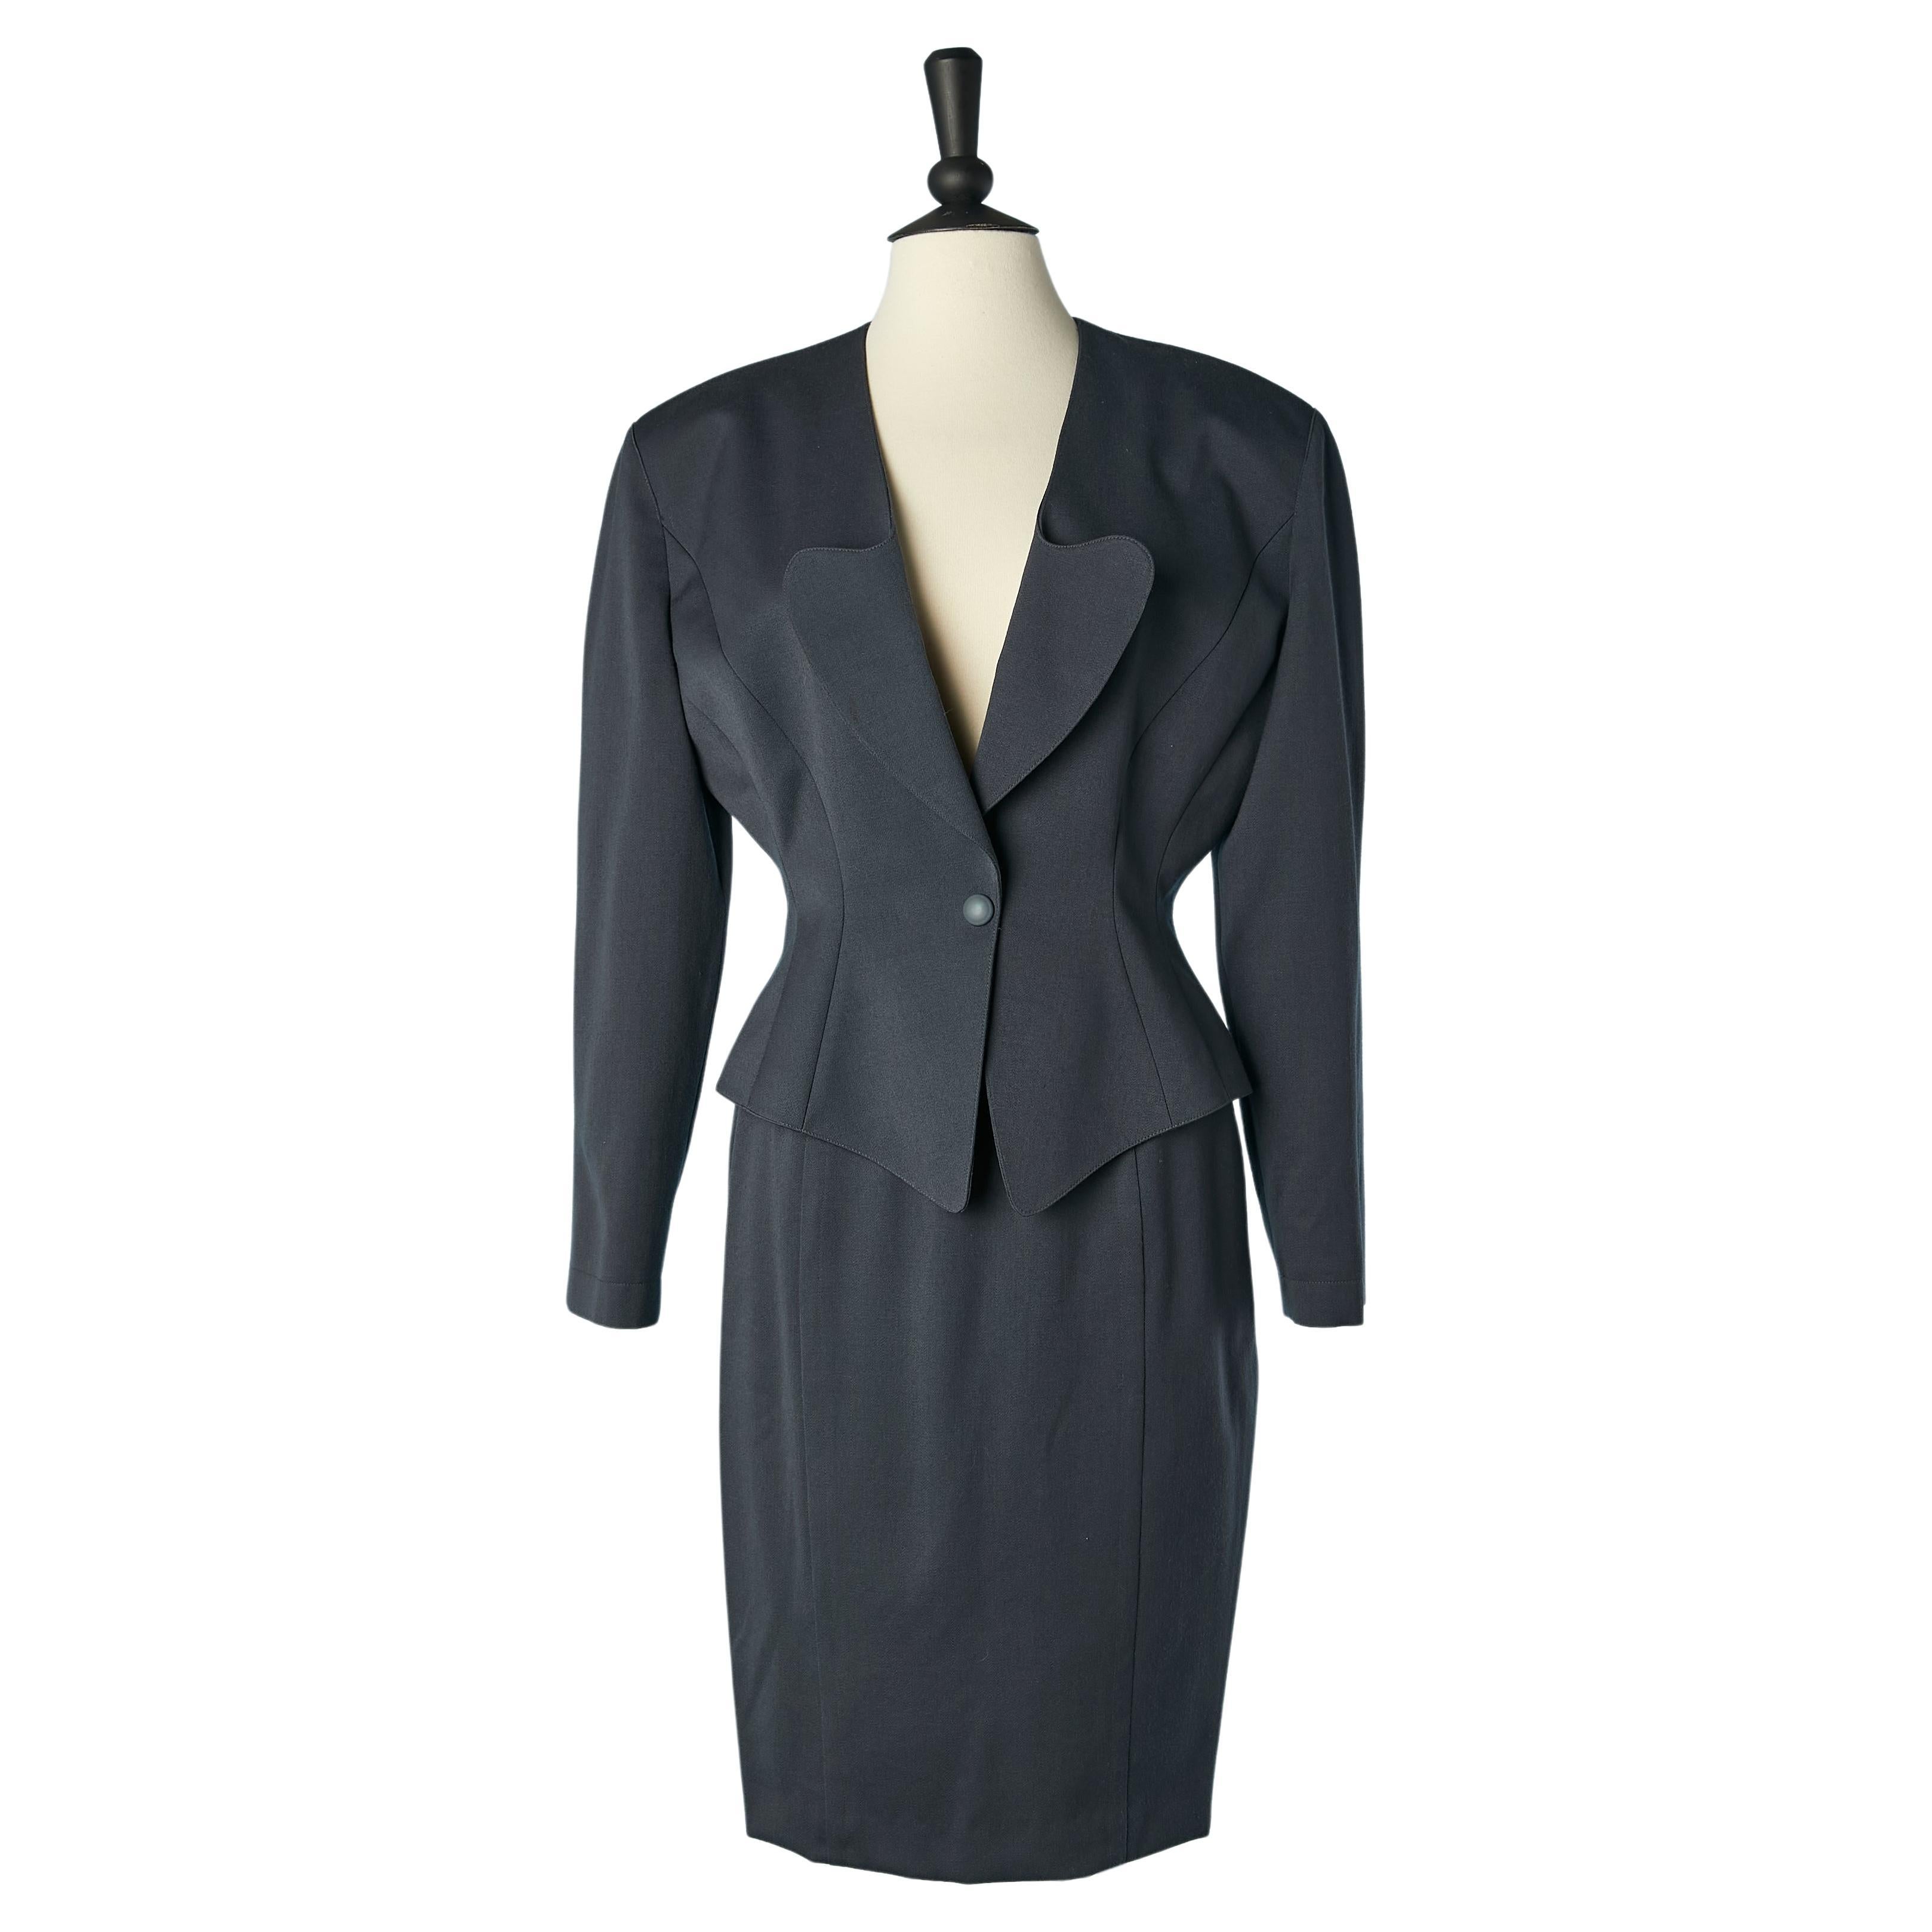 Anthracite grey wool skirt-suit MUGLER by Thierry Mugler  For Sale